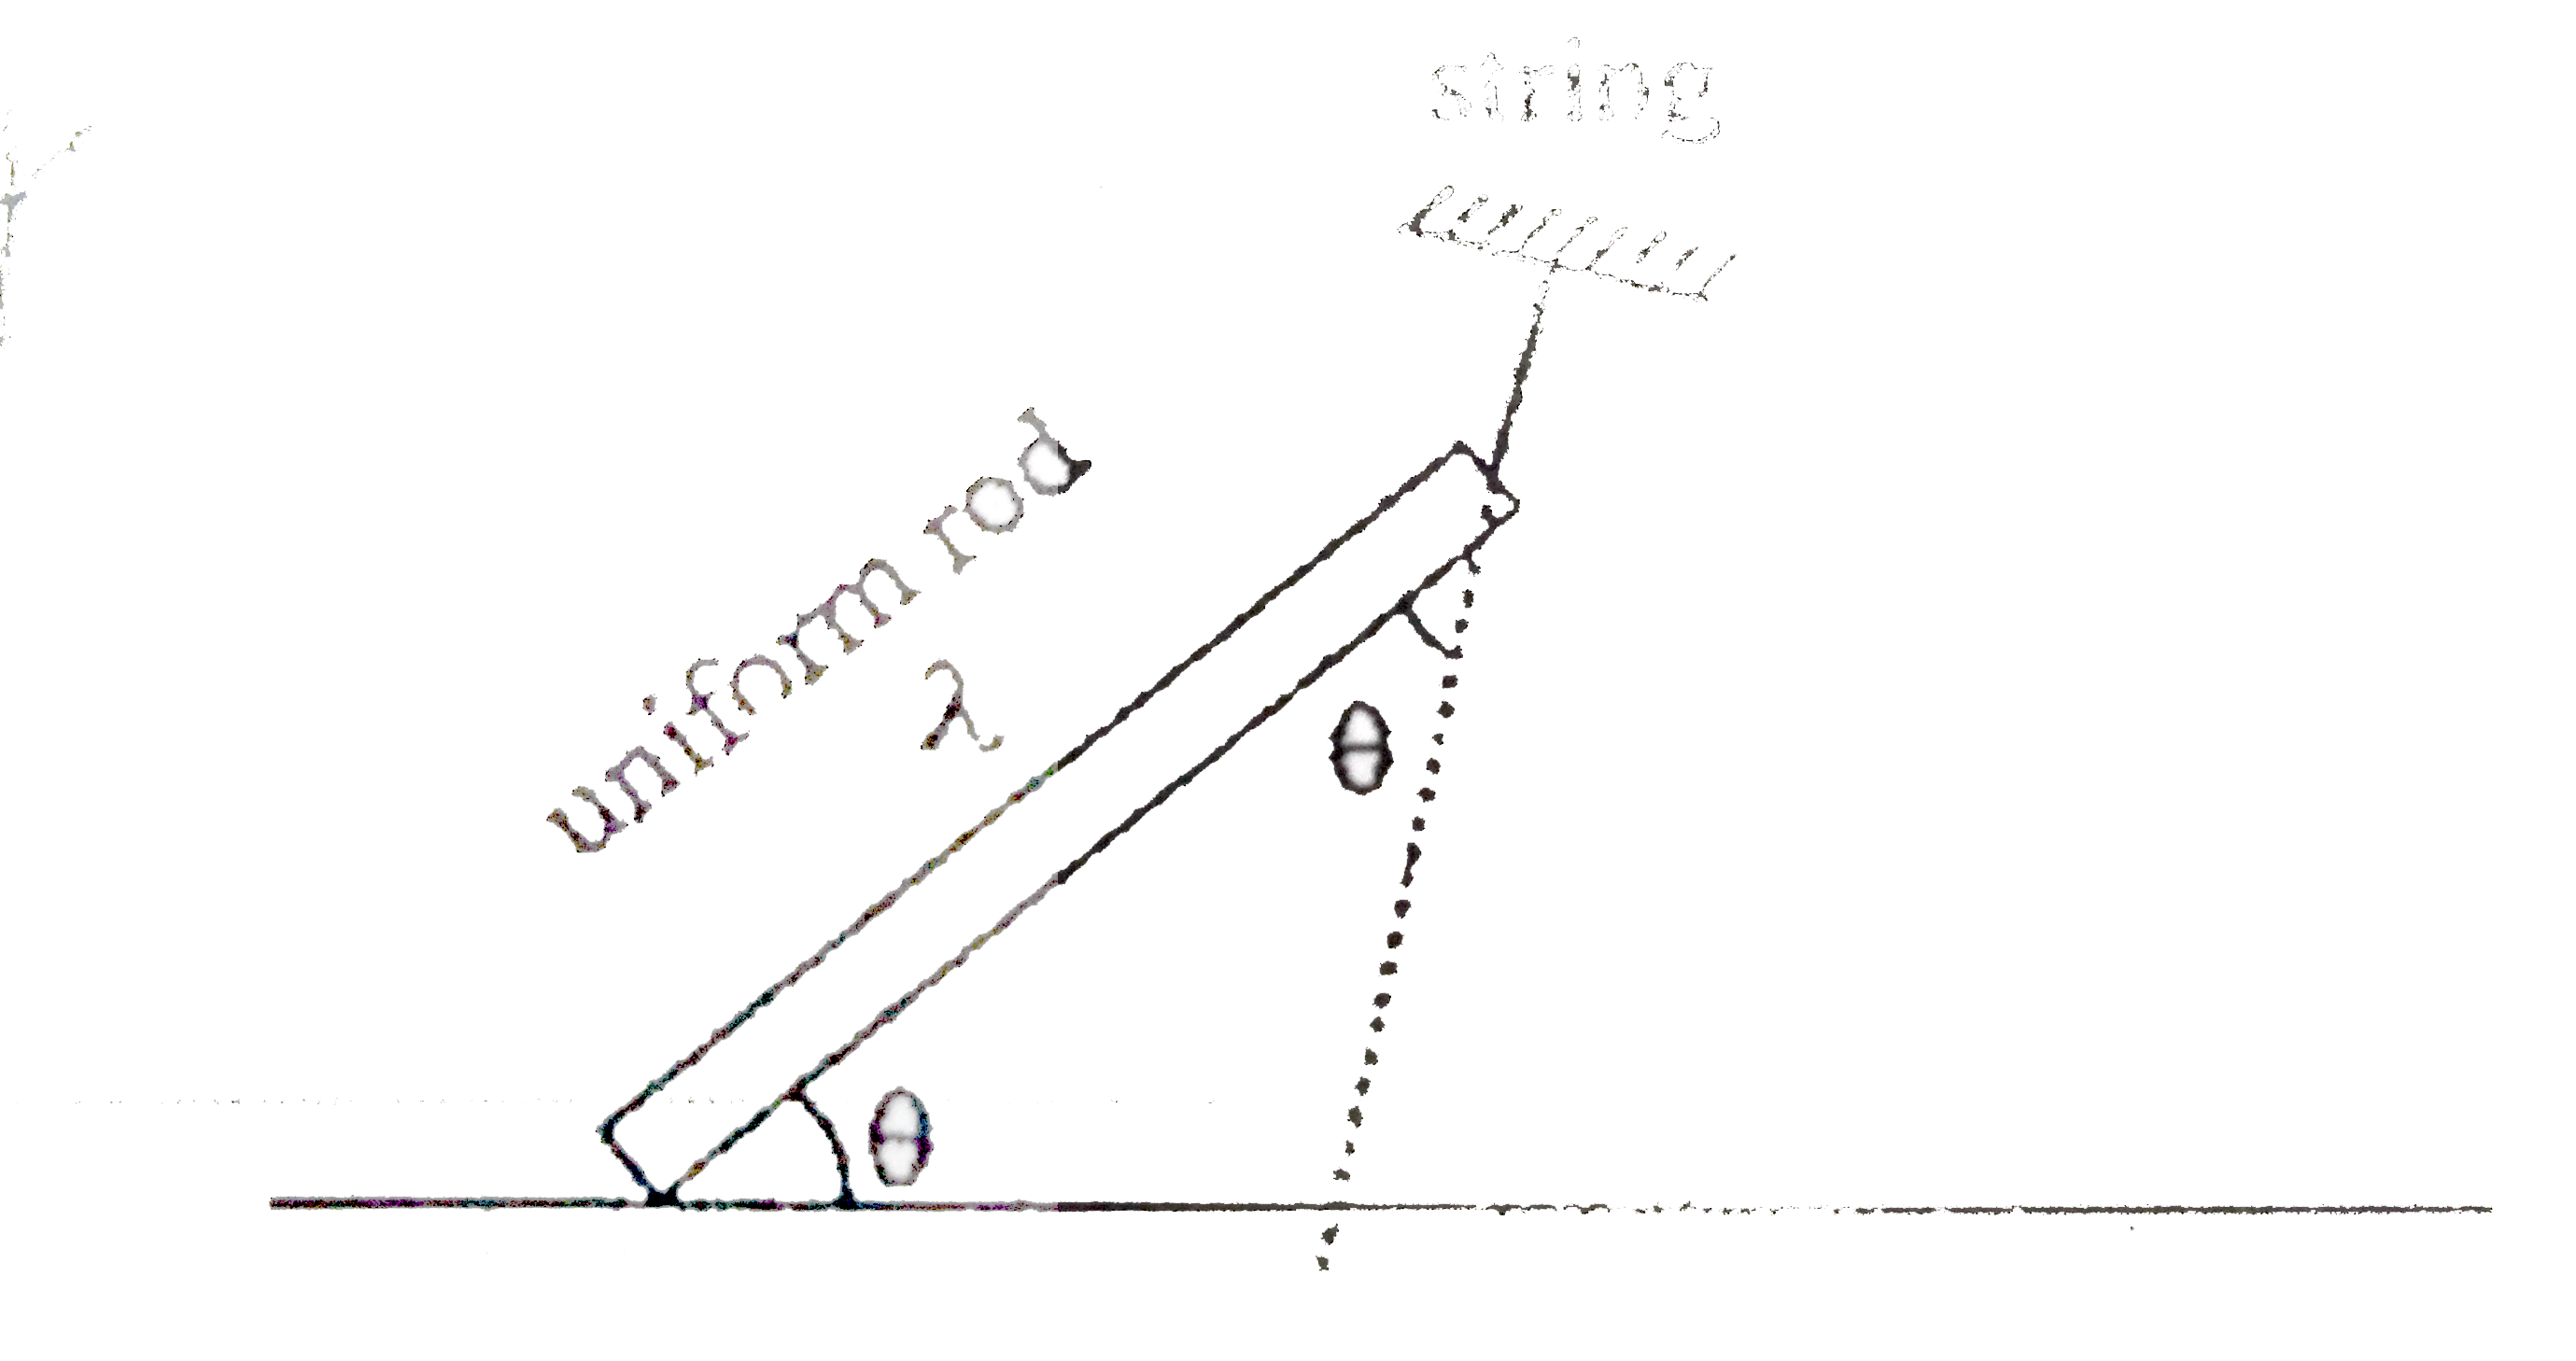 The rod shown is in equilibrium position. Find stress in the string.